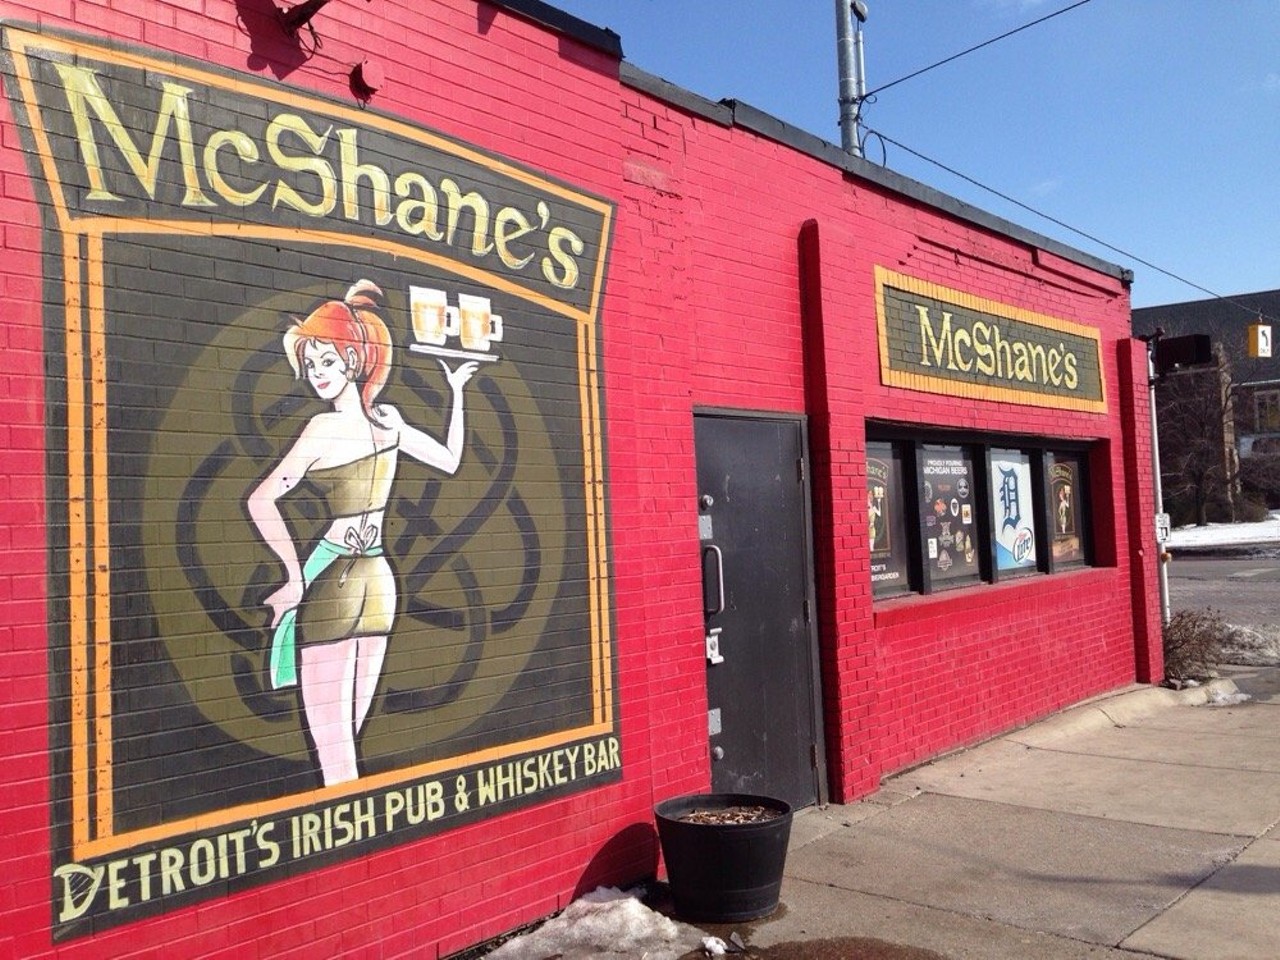 Start drinking at 7.a.m. at McShane's Irish PubThis Corktown standard will open at the bright and early hour of 7 a.m. come parade day. They'll have a tent, live music, and traditional Irish fare (think: corned beef and cabbage, Reubens, and shepherd's pie) and no cover. Though they won't have any outrageous drink specials, they promise to not up their drink prices just because it's their busiest day of the year. 1460 Michigan Ave., Detroit; 313-961-1960; mcshanespub.com (Photo via Yelp, McShane's Pub)